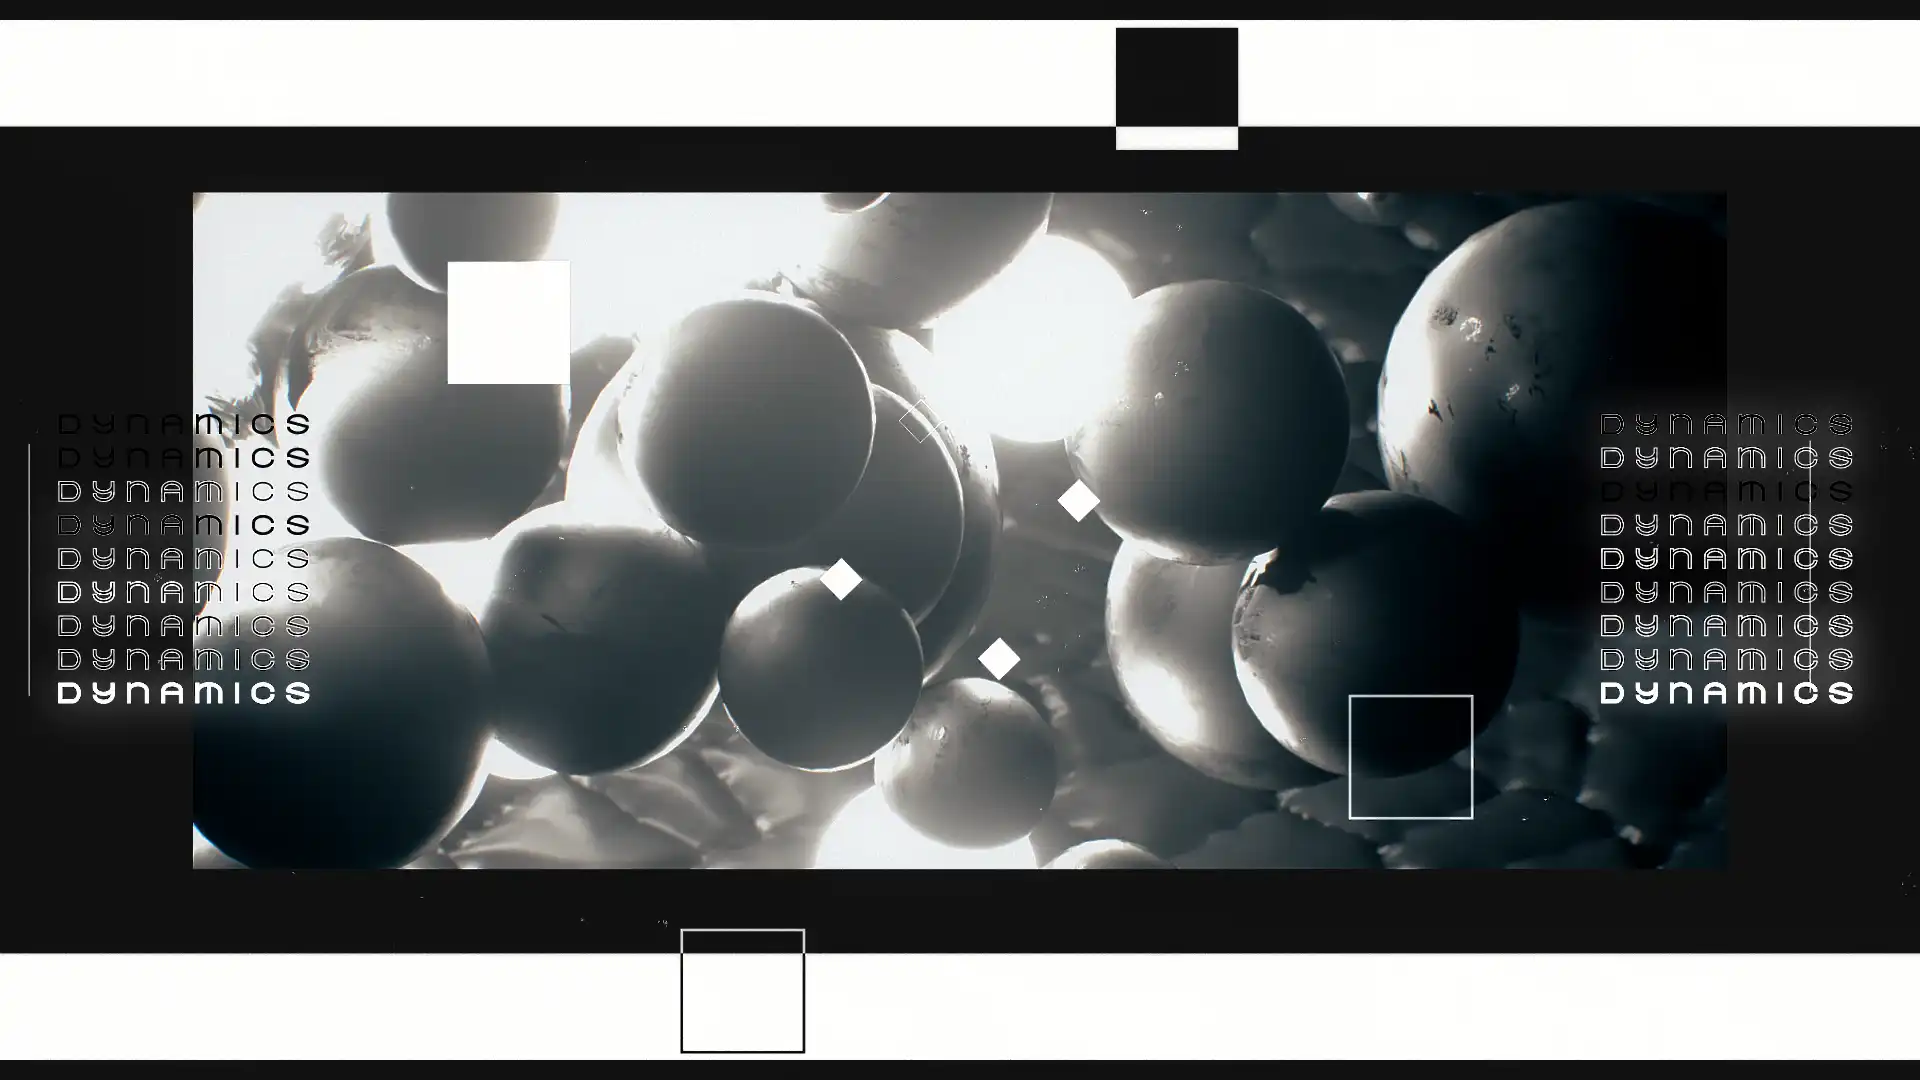 still image from the demo reel showing many spheres in black and some eluminating the space. It is a close up shot with graphic design on top of it with the words 'Dynamics' on either side of it. It is mostly black and white.